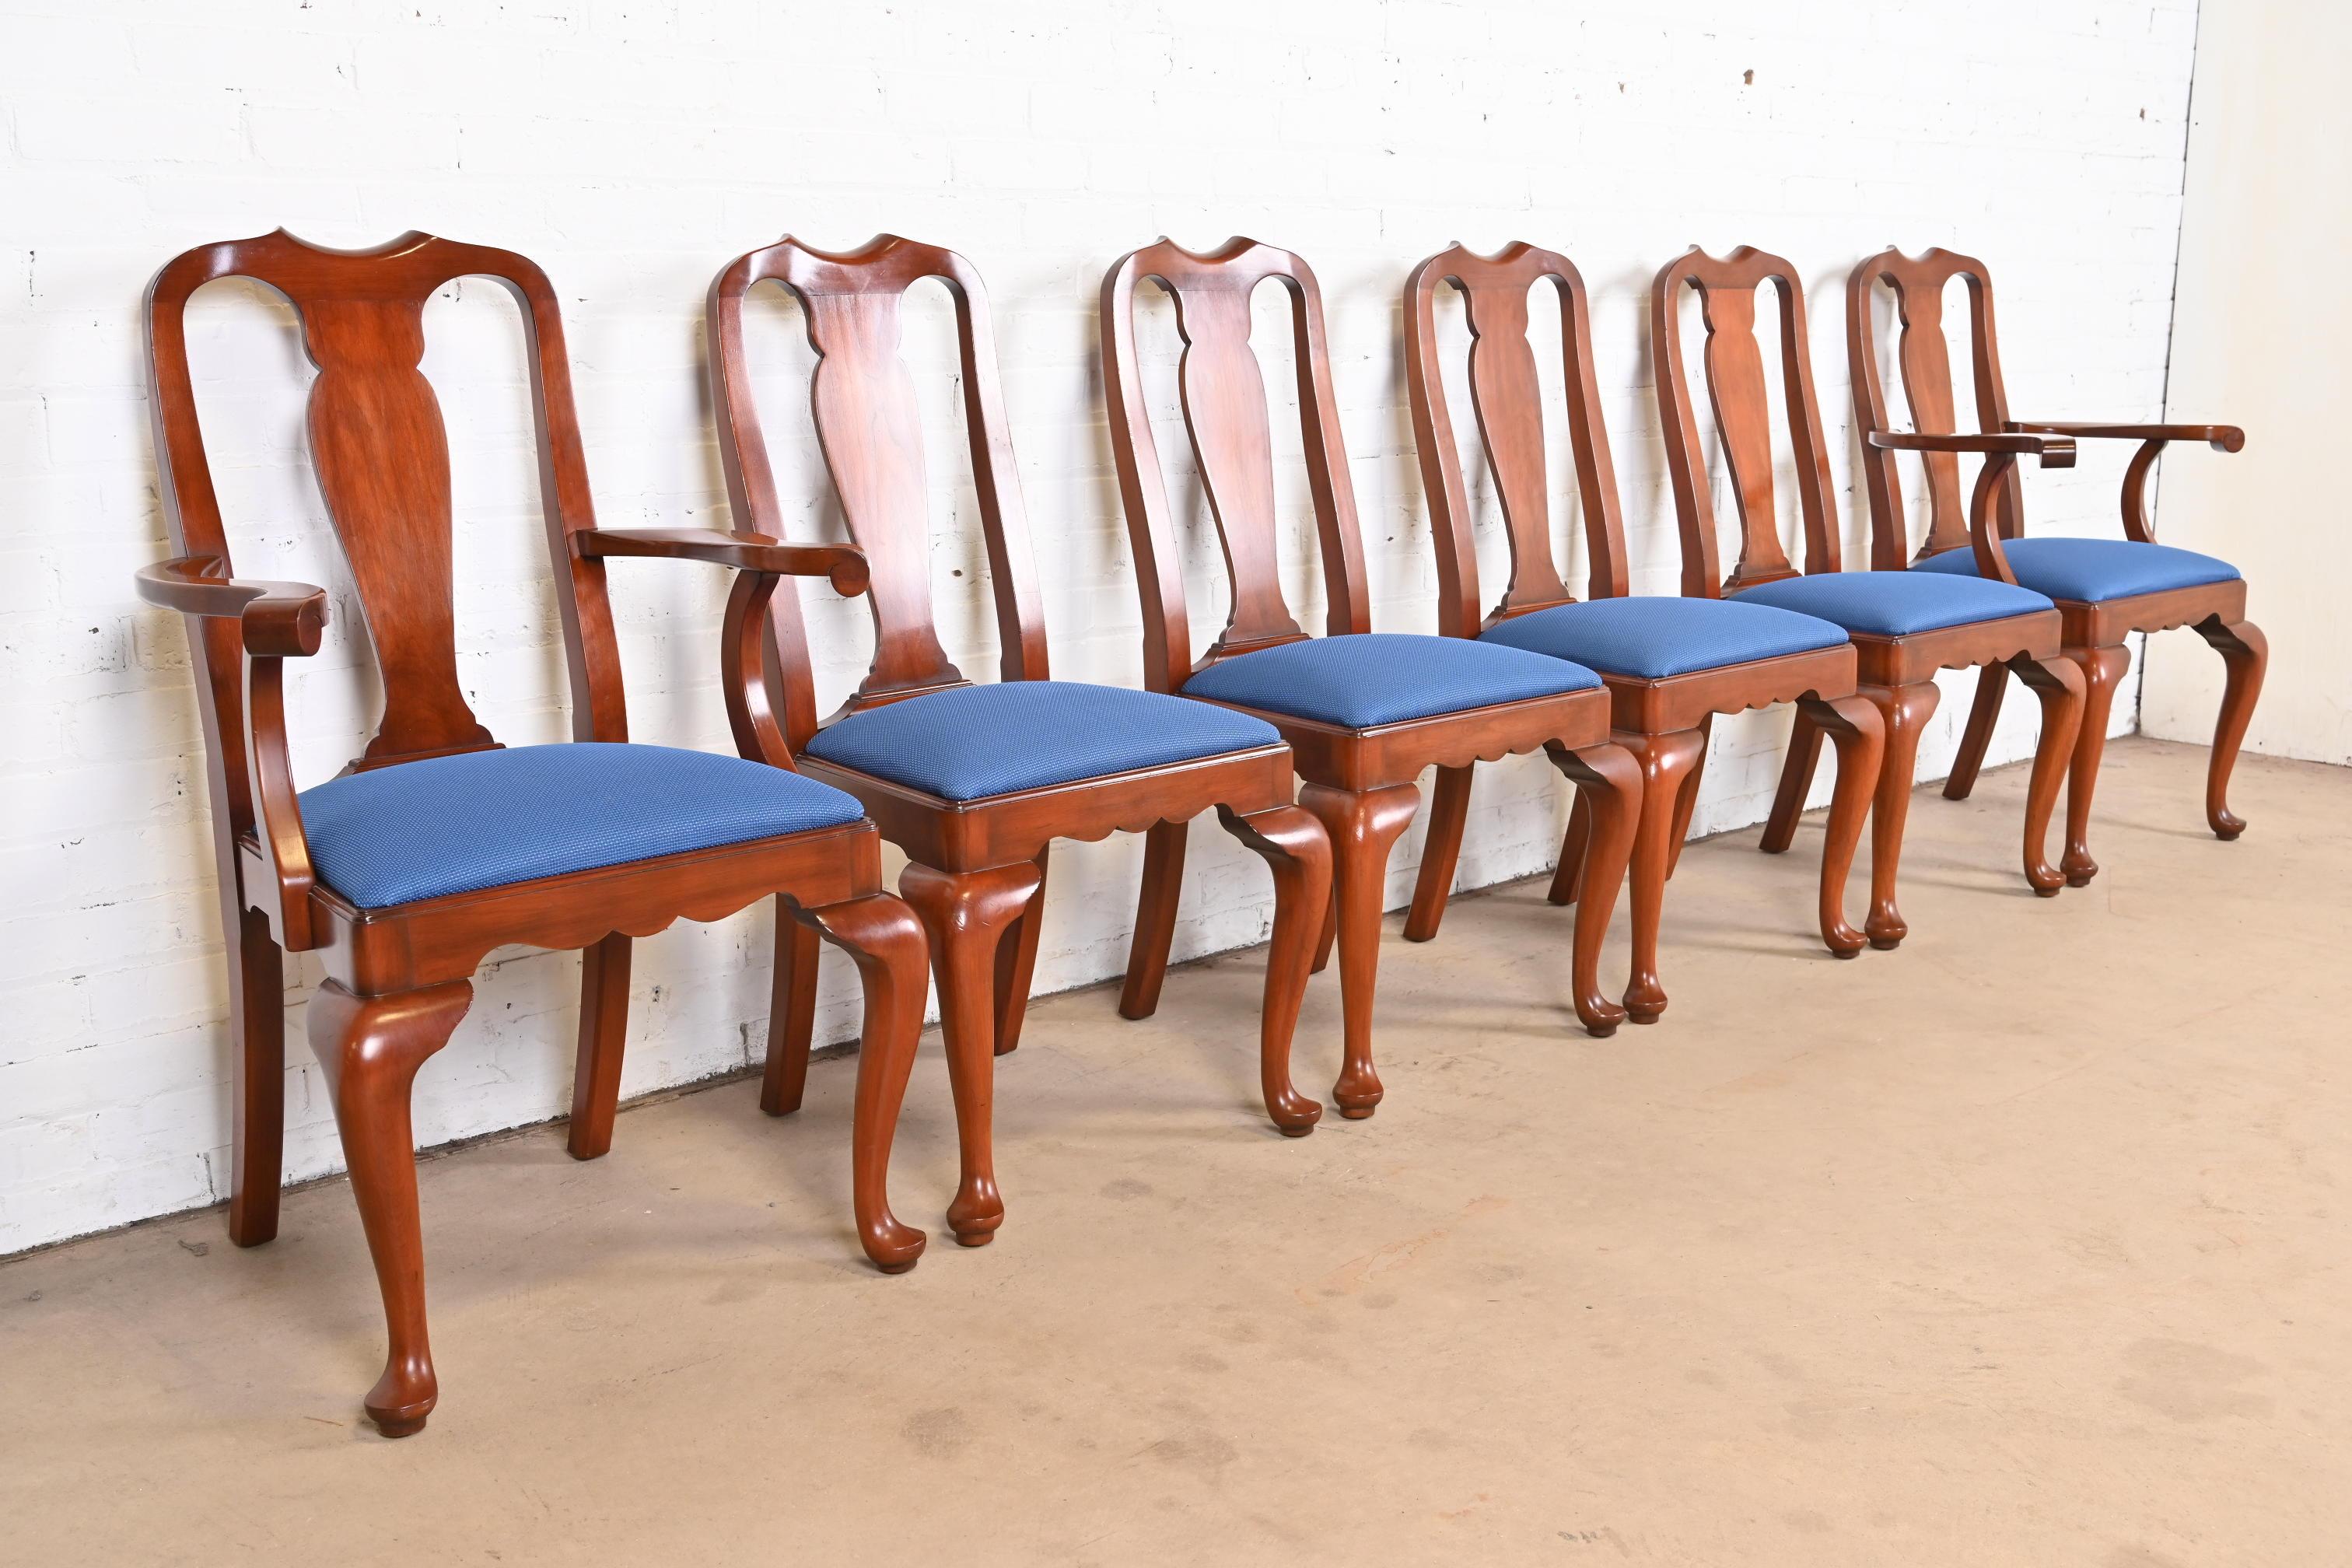 Upholstery Henkel Harris Queen Anne Solid Cherry Wood Dining Chairs, Set of Six For Sale